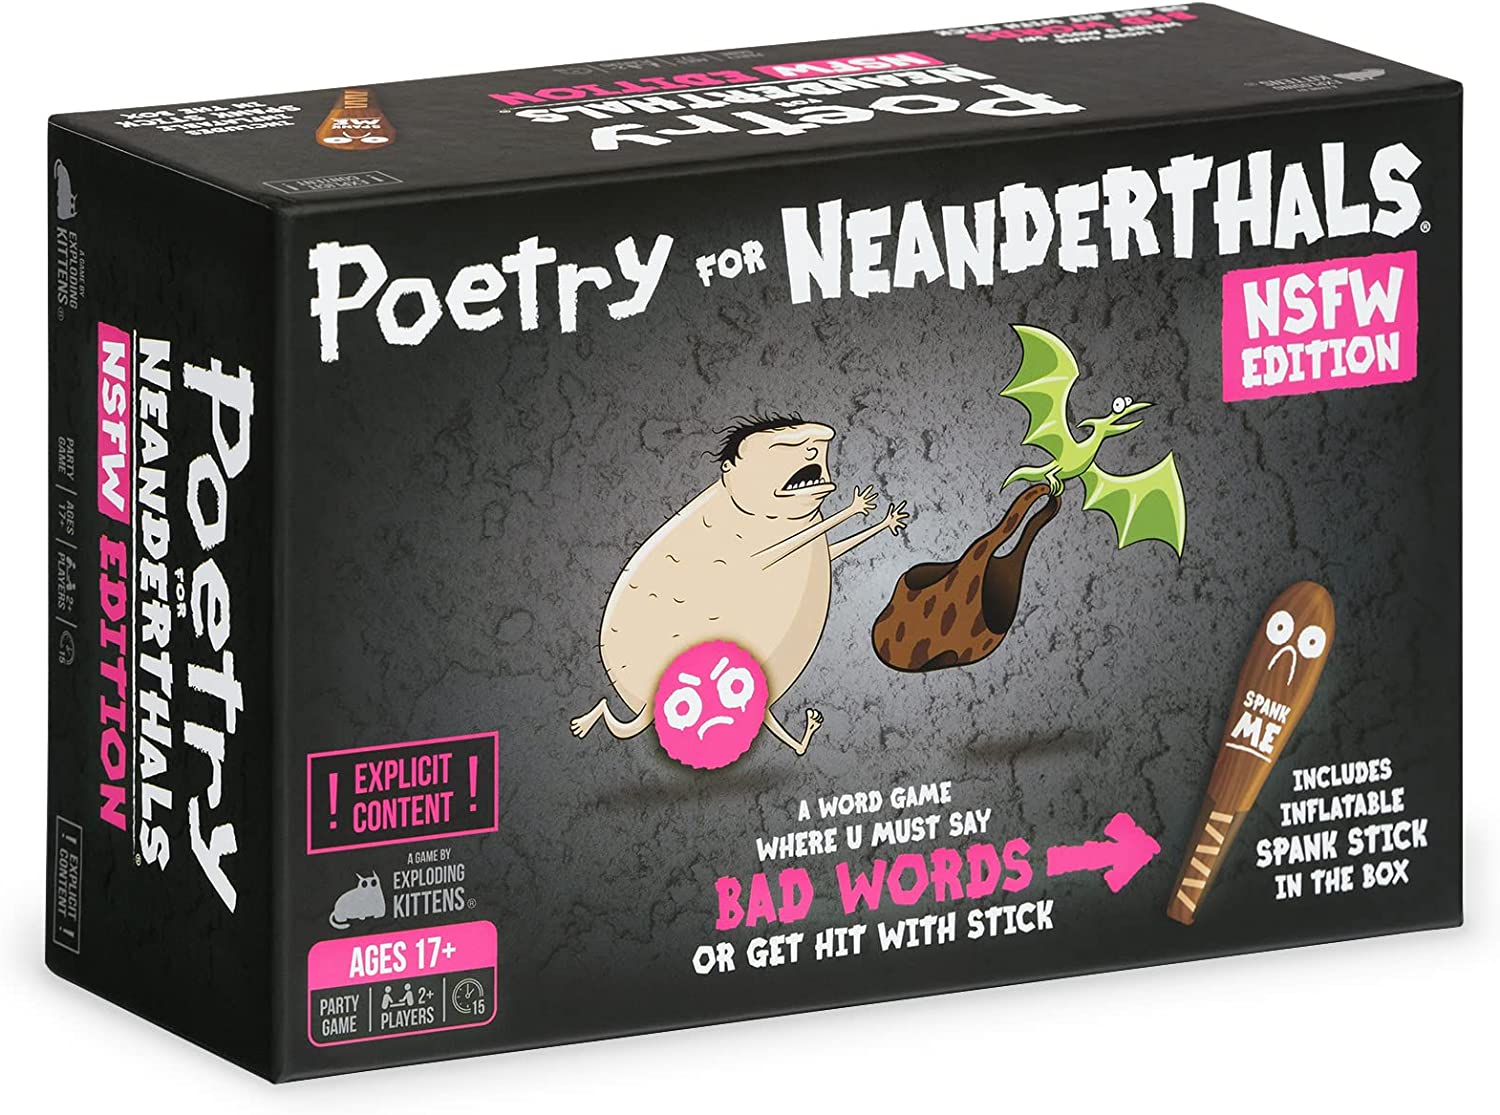 Poetry For Neanderthals: More Cards box 